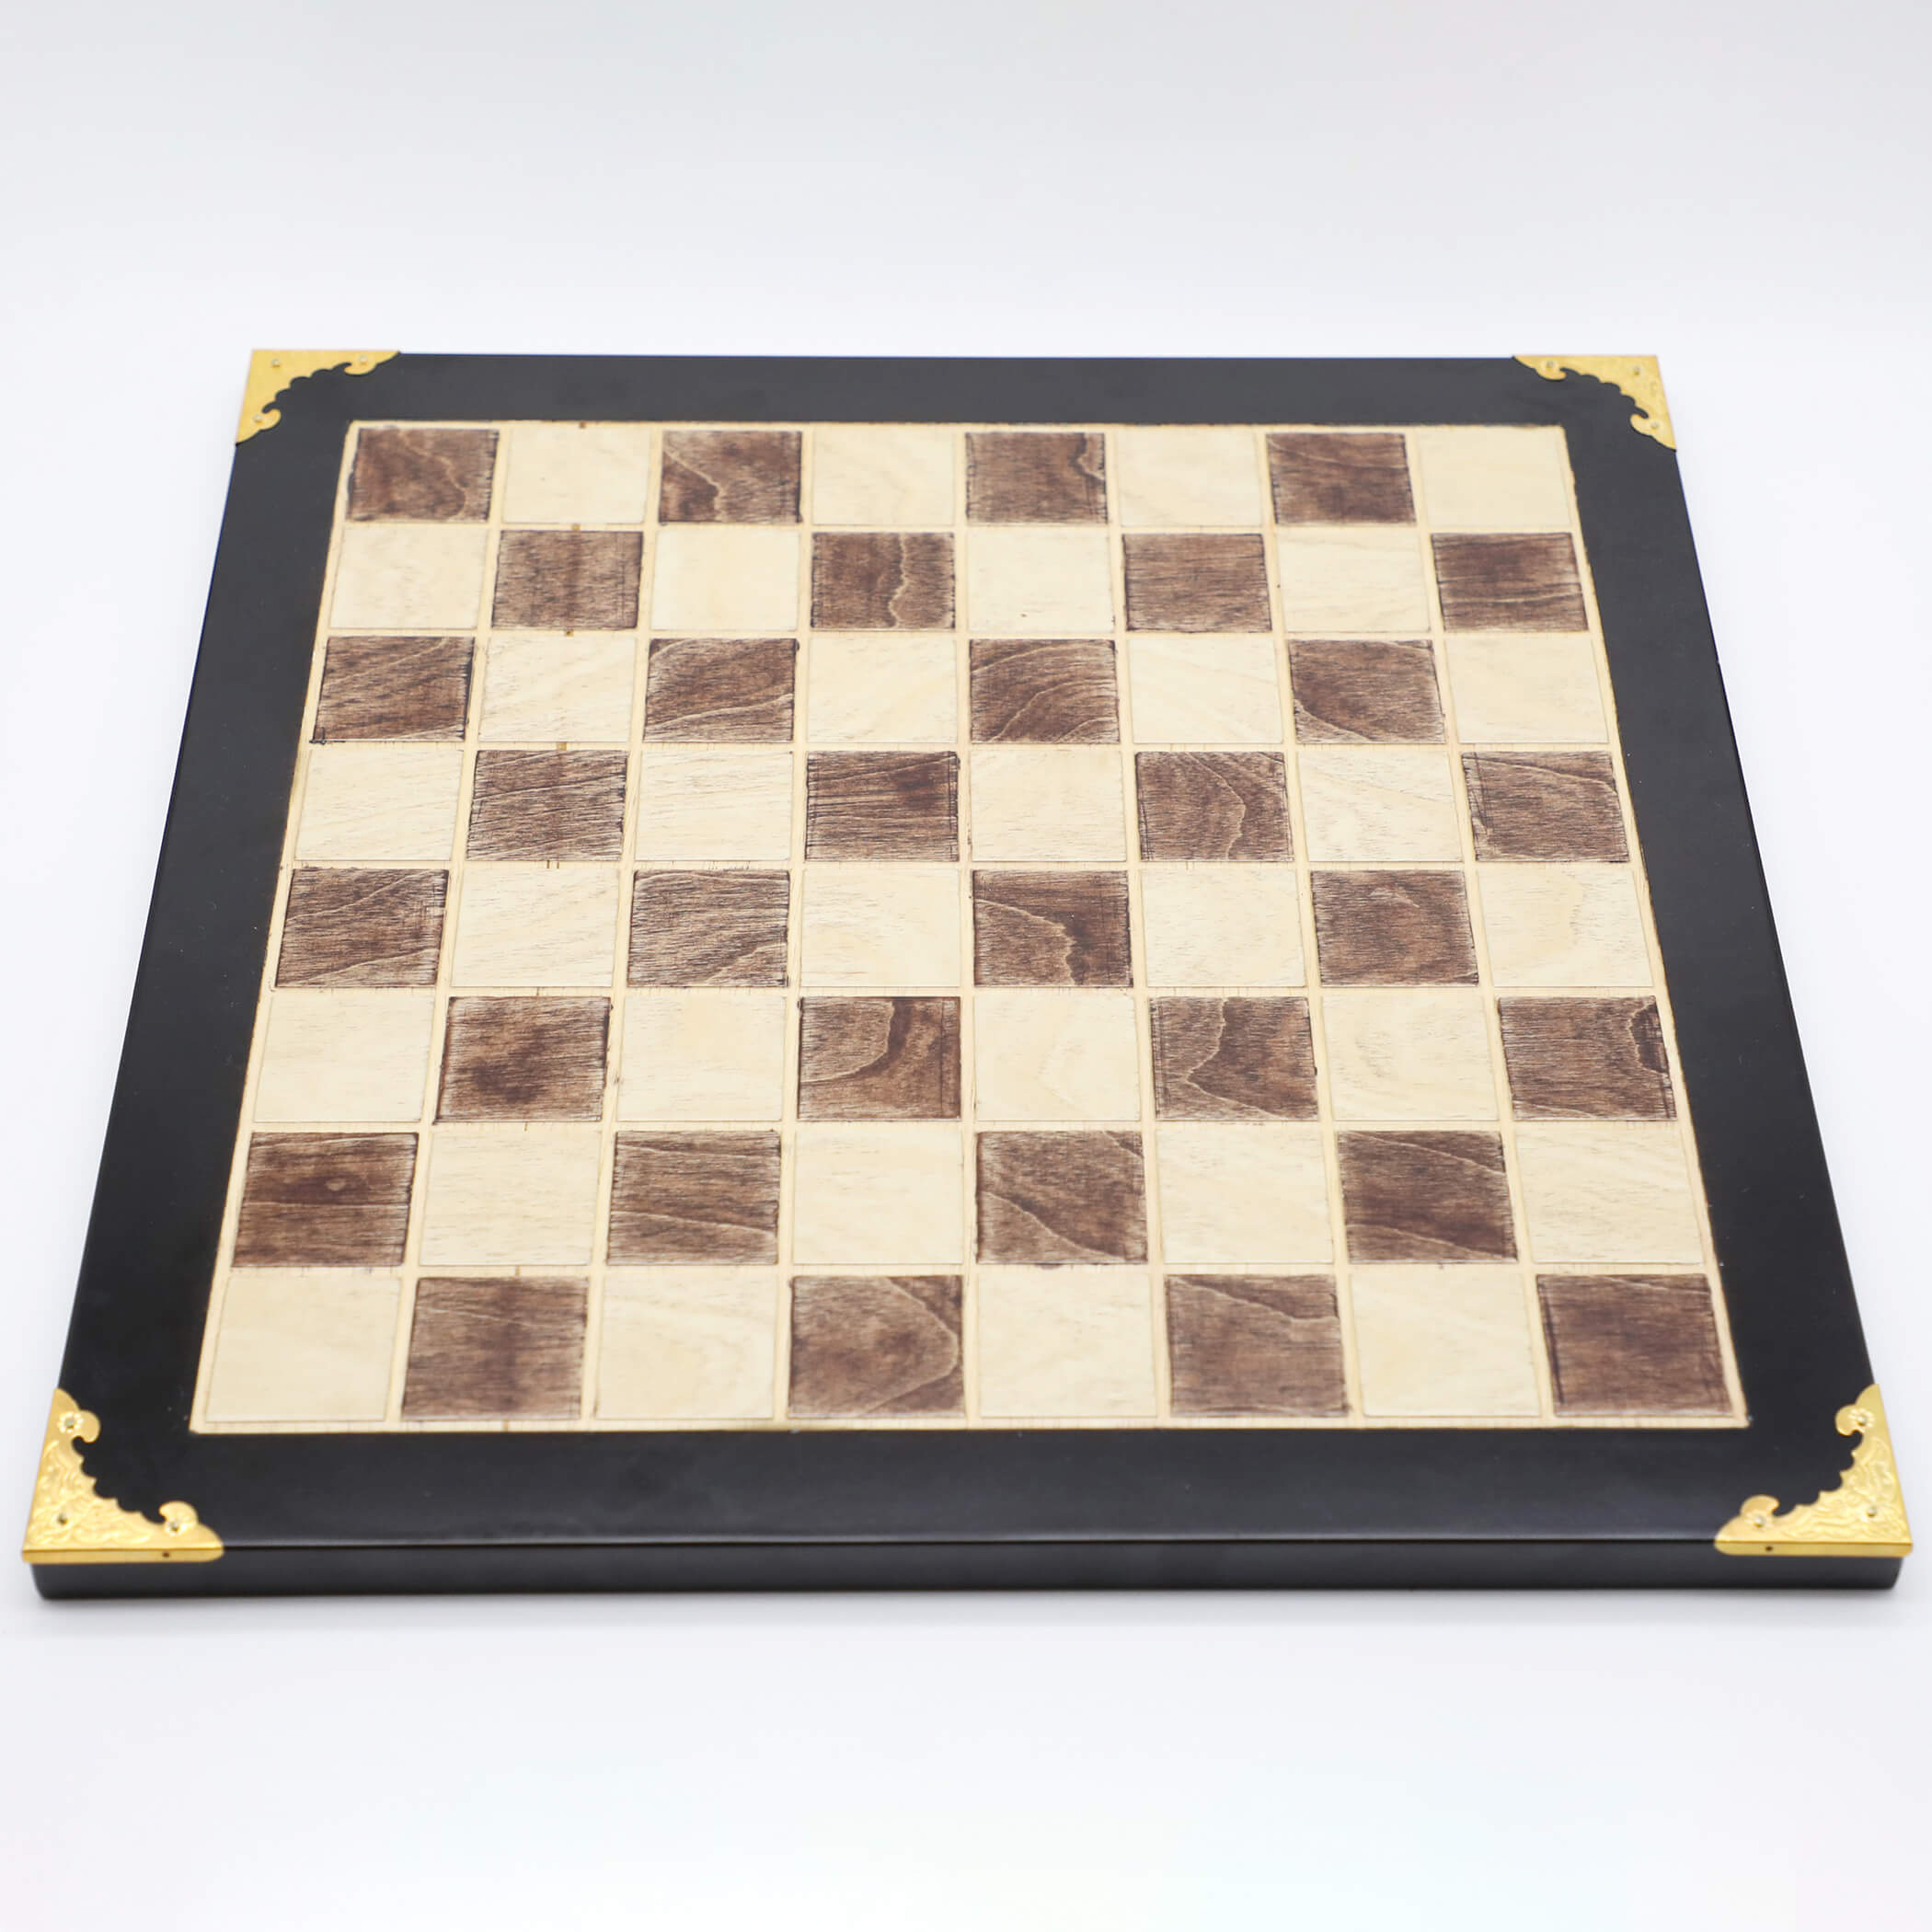 Unique Luxury Chess Sets with High End Boards & Pieces - Henry